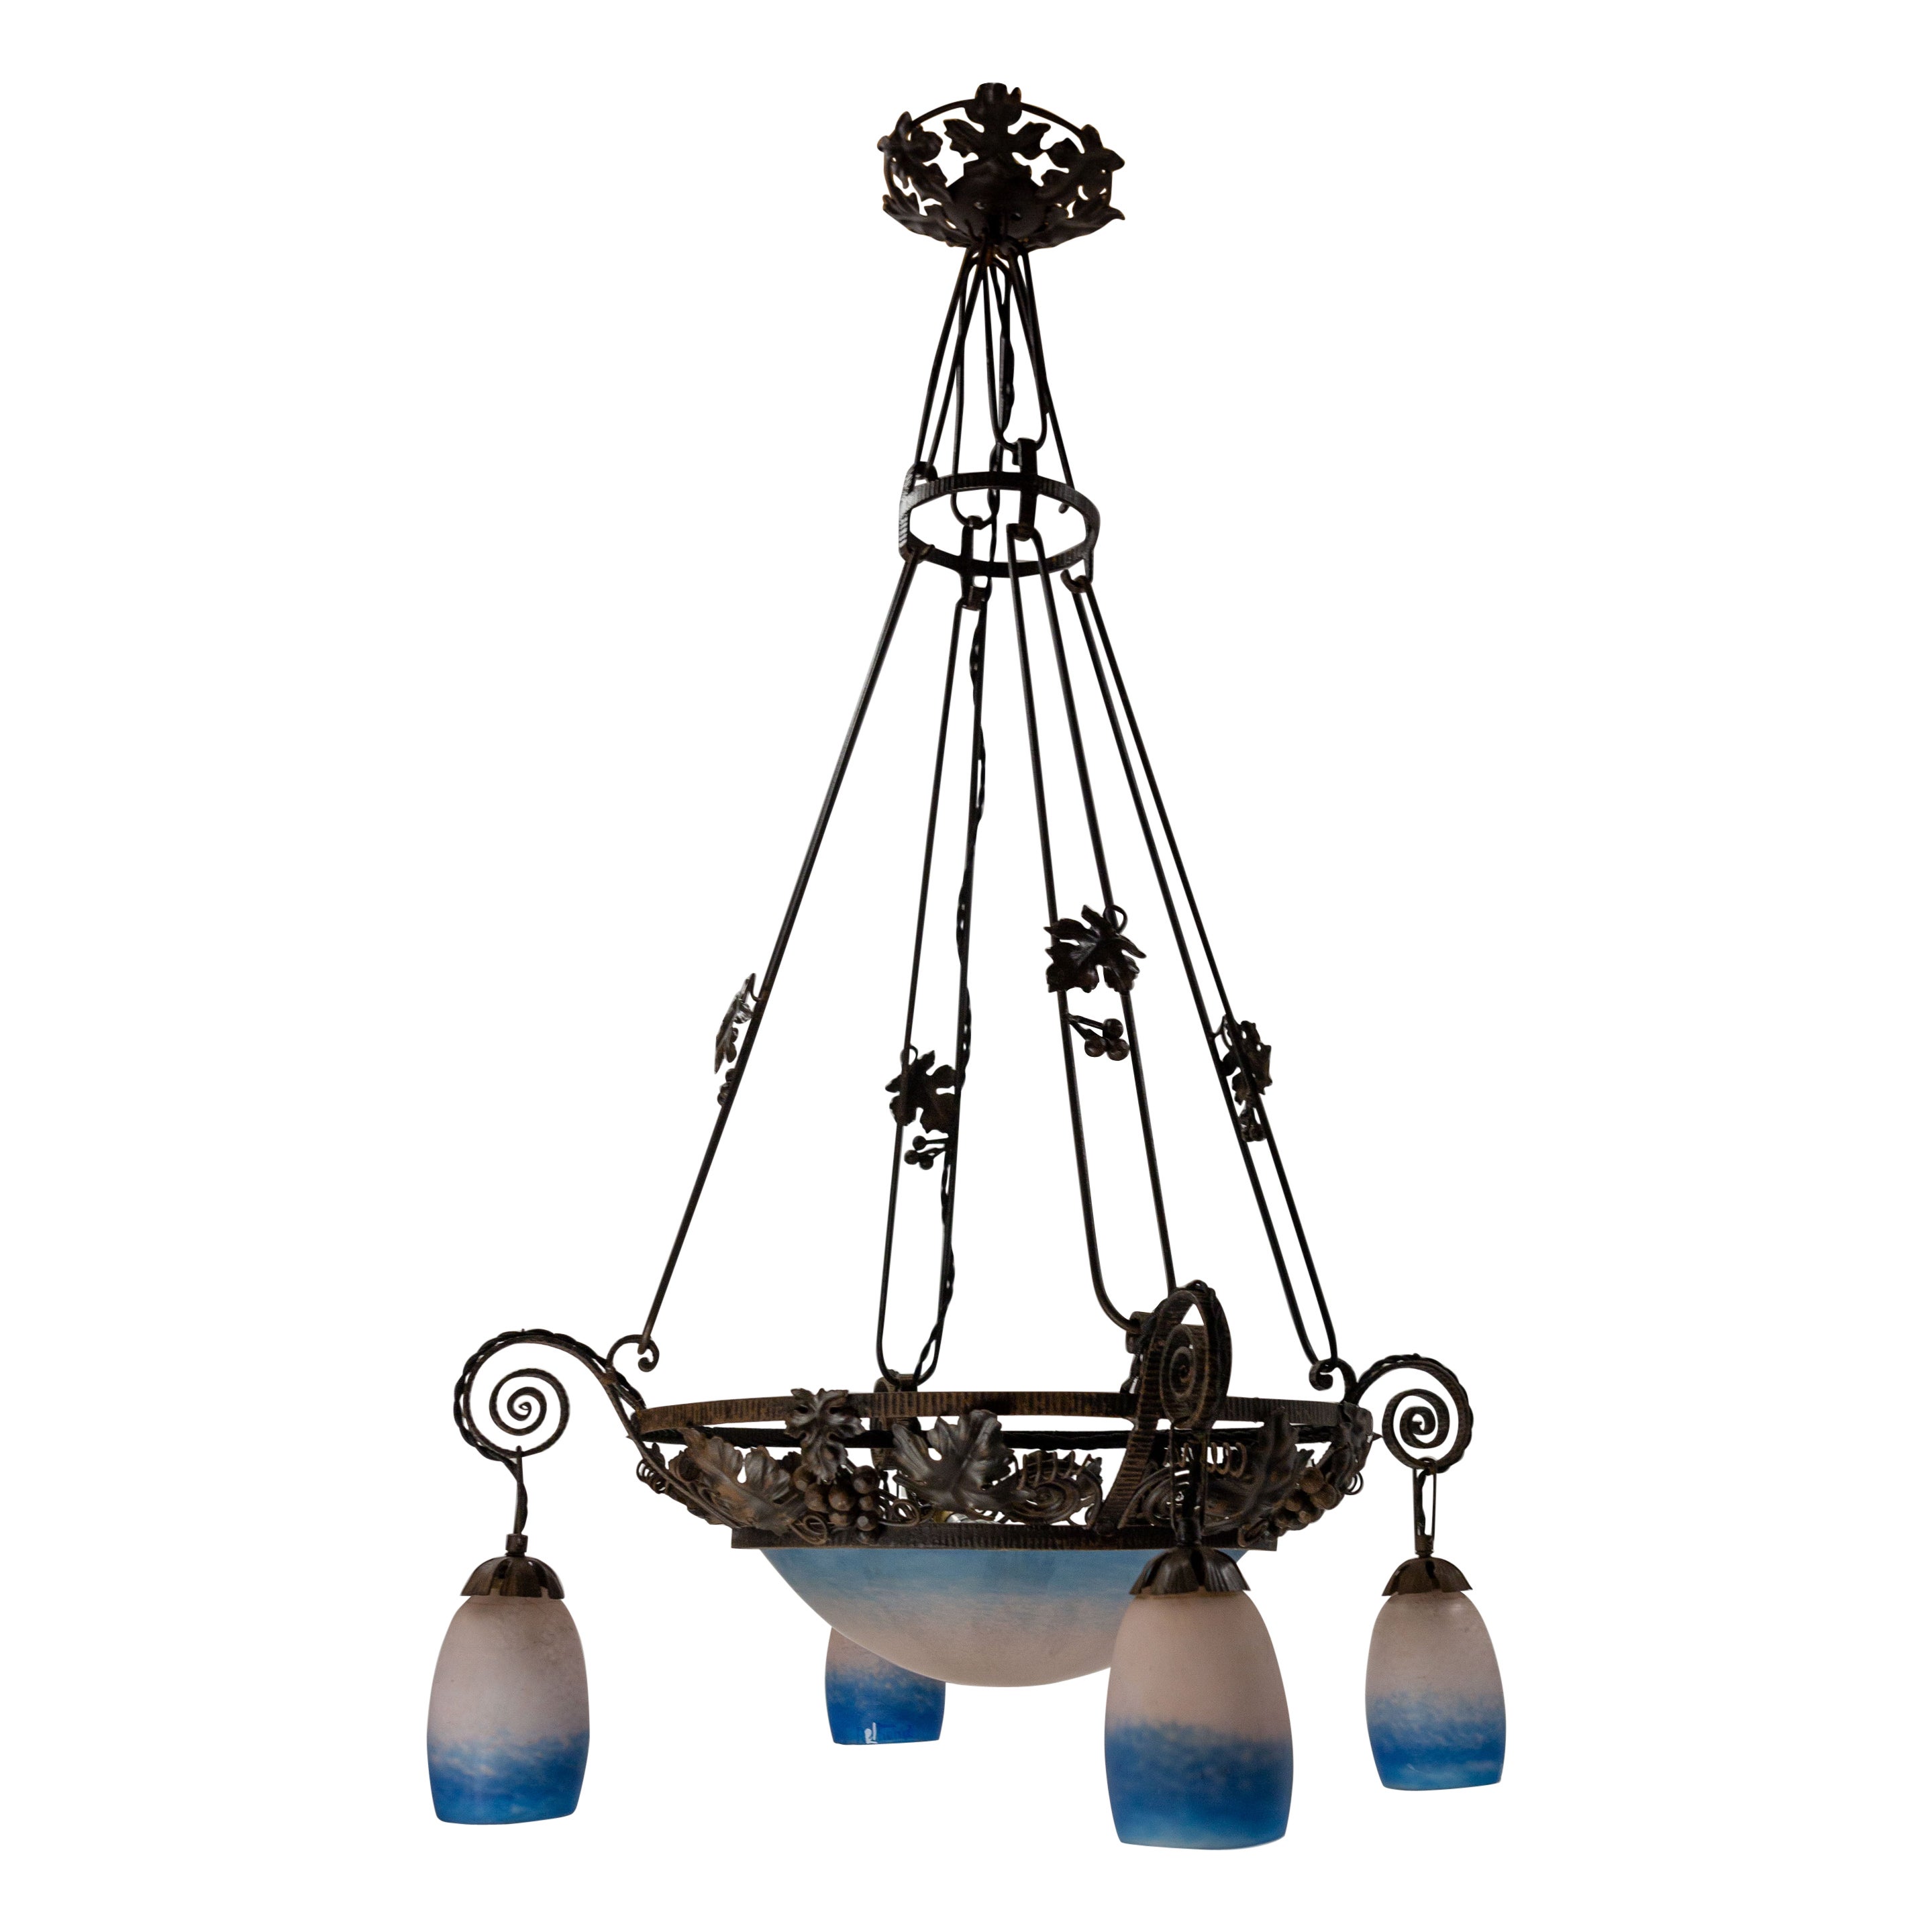 French Art Deco Chandelier Colored Glass & Wrought Iron Ceiling Pendant, C 1930 For Sale